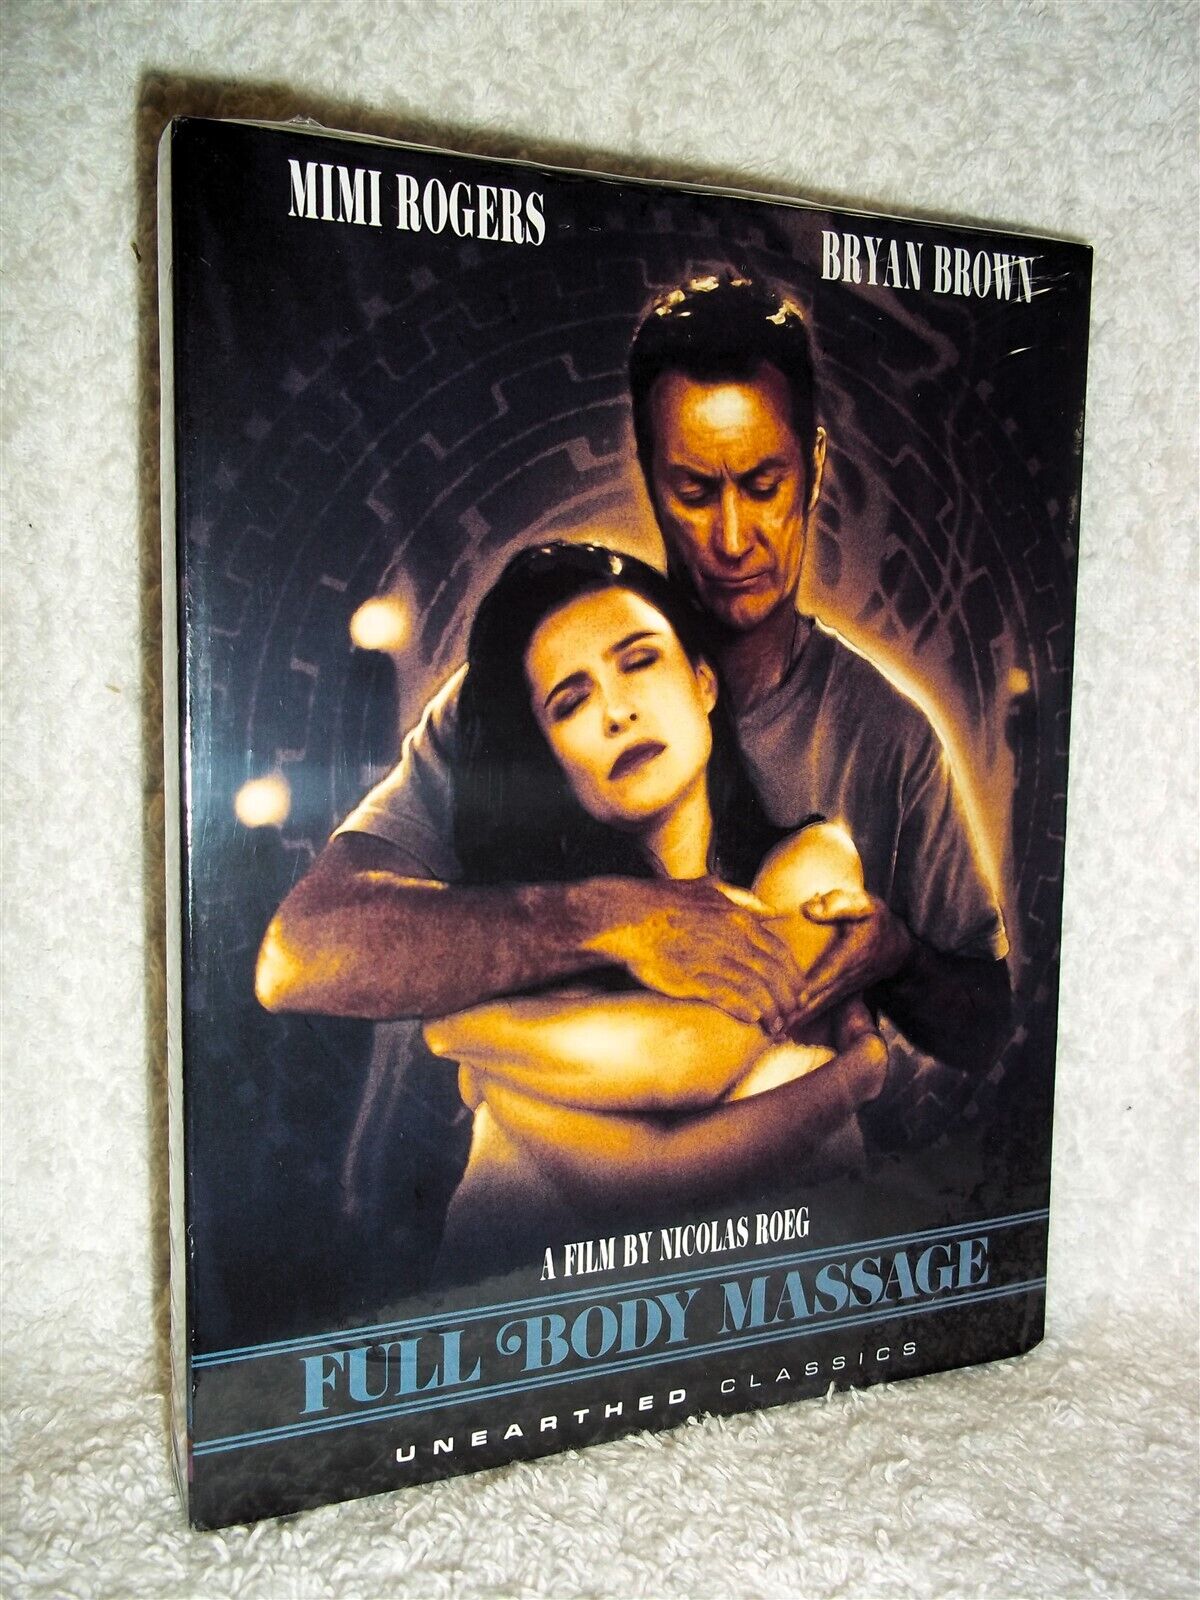 christian gosnell recommends mimi rogers sensual massage pic